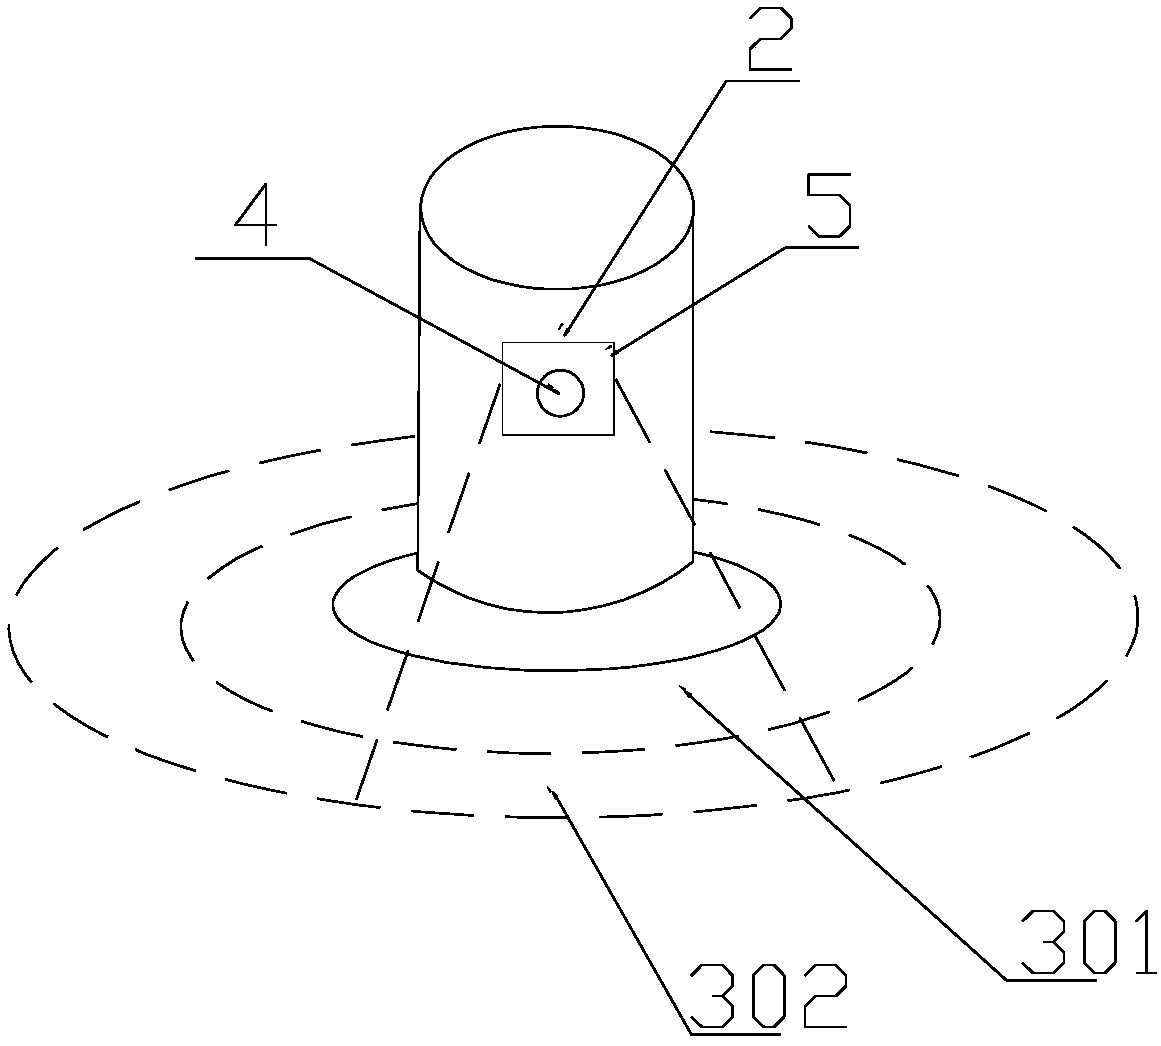 Display control device used for household electrical appliances and washing machine